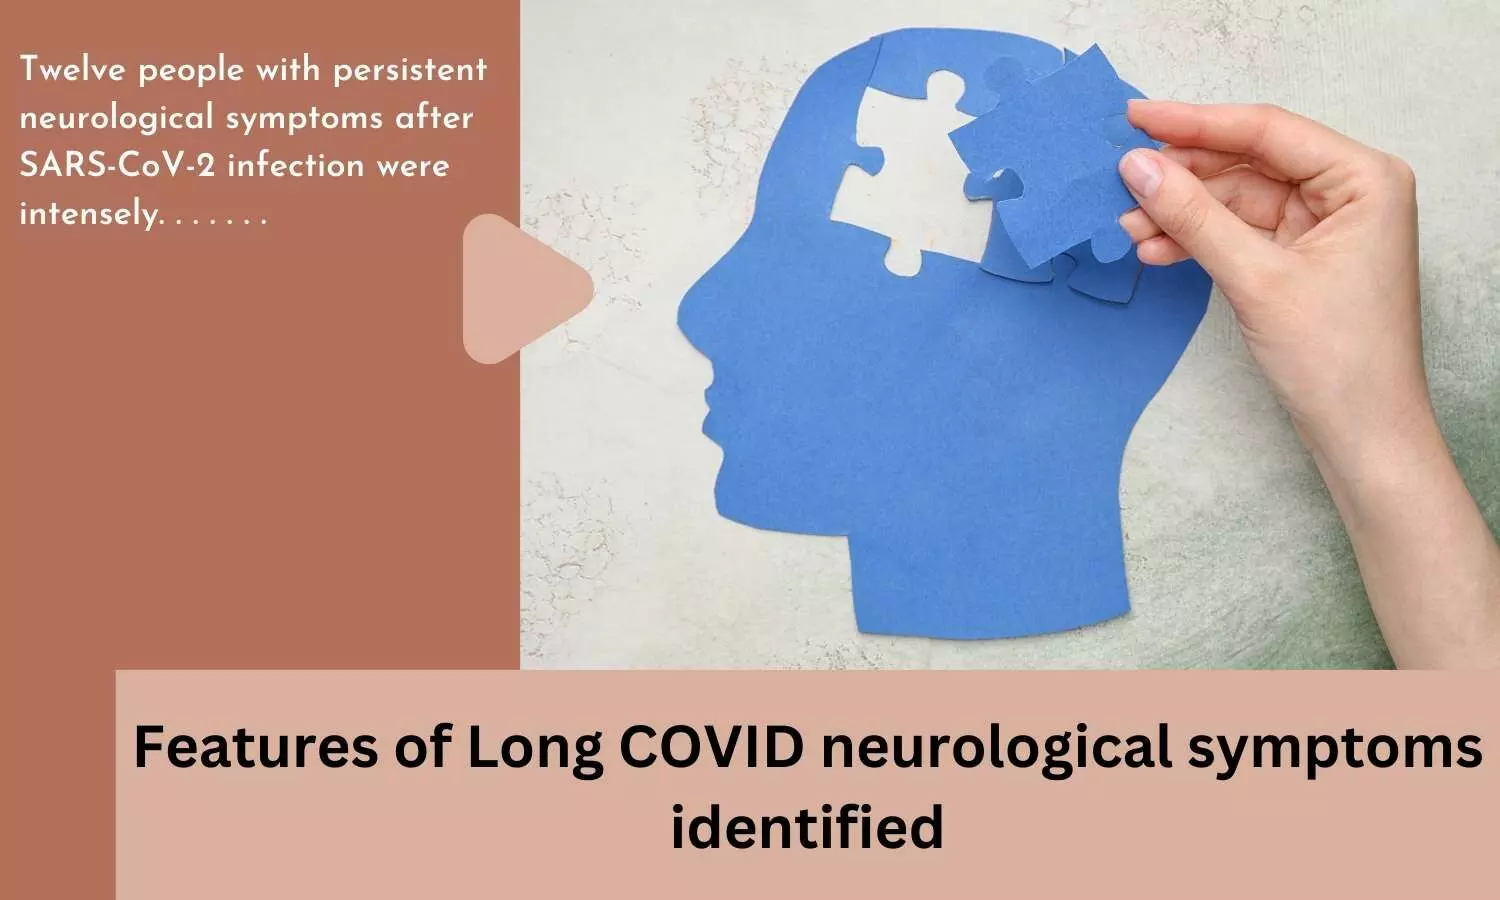 Features of Long COVID neurological symptoms identified